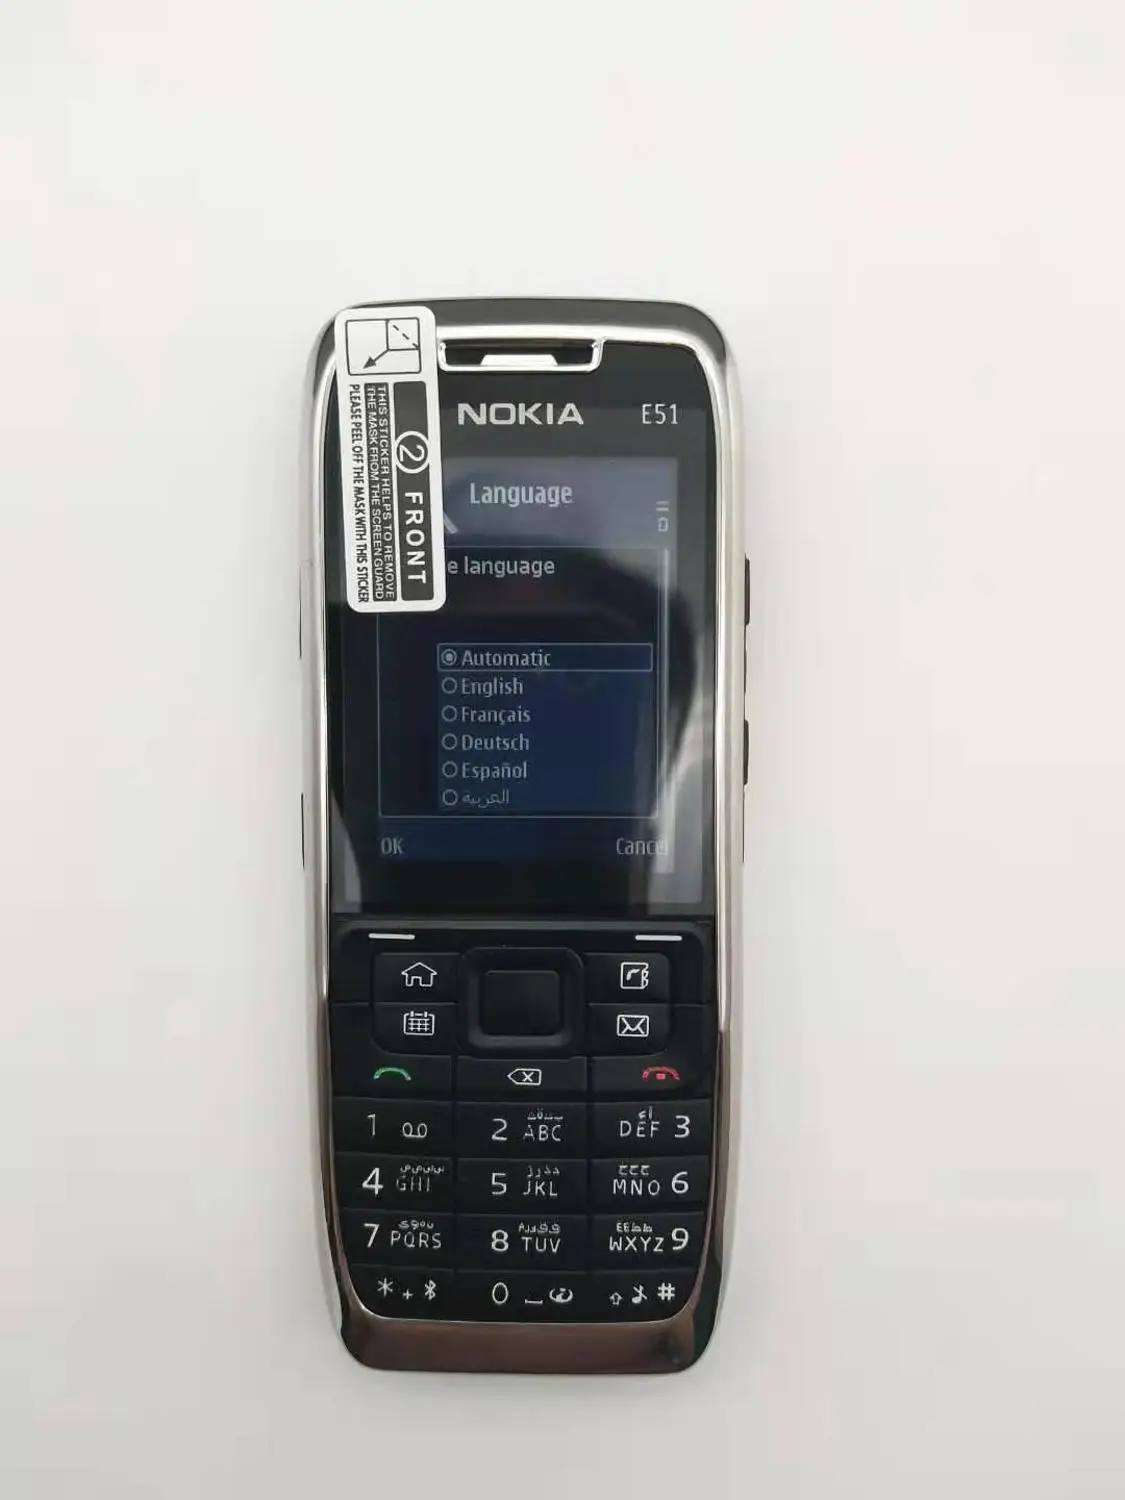 nokia e51 without camera refurbished original unlocked e51 no camera mobile phones with java wifi unlock cell phone refurbished free global shipping